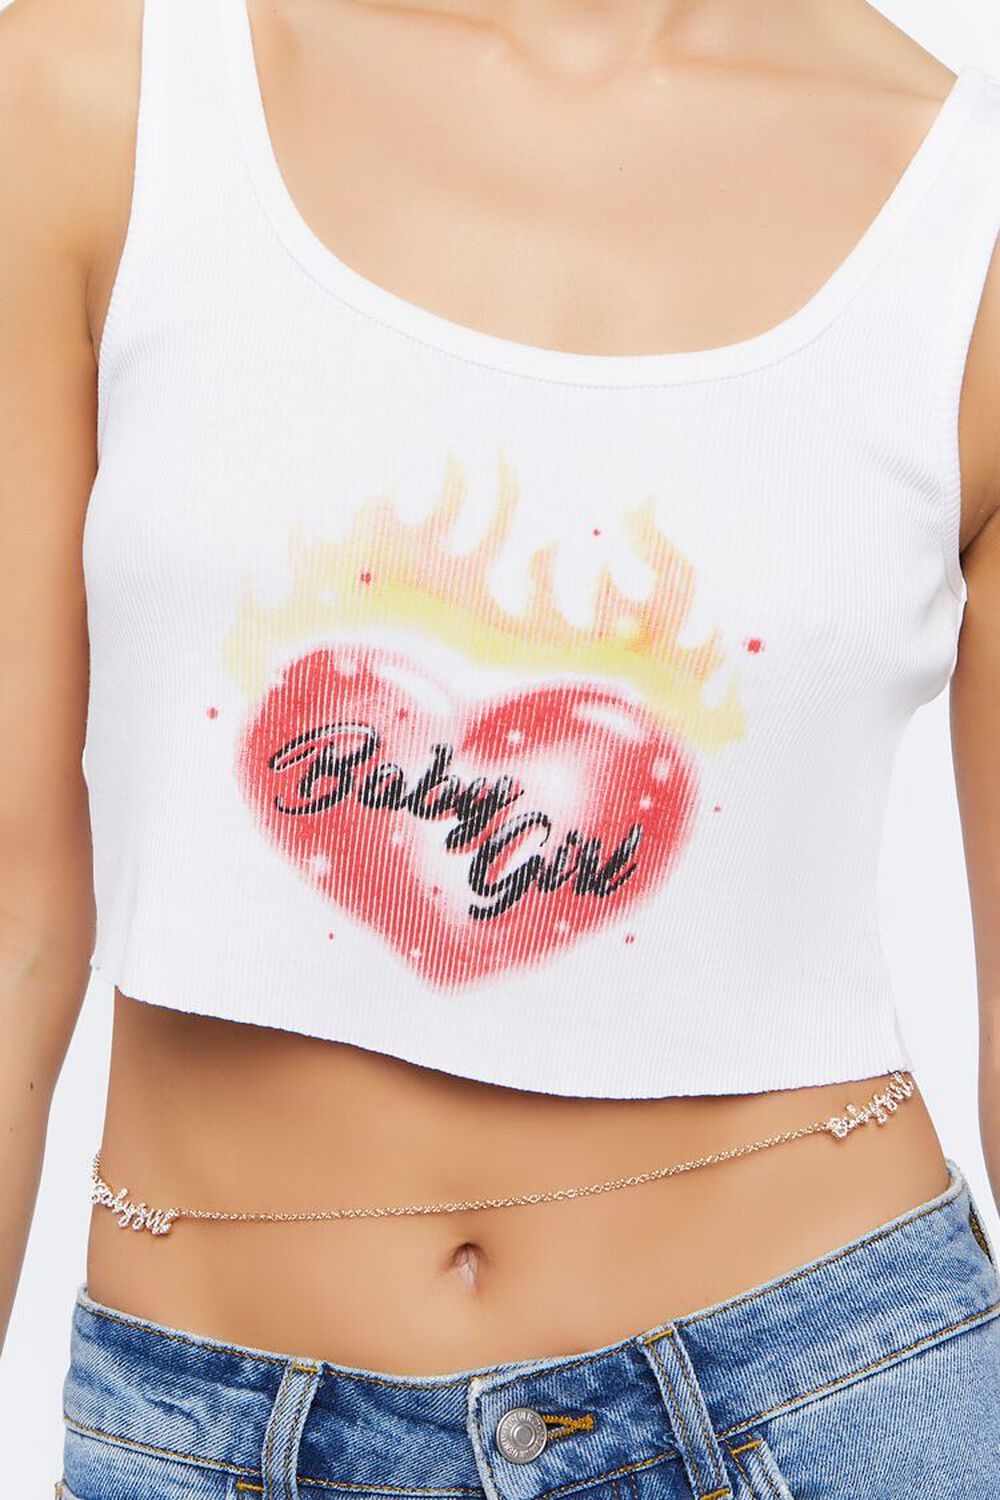 GOLD/CLEAR Rhinestone Babygirl Belly Chain, image 1